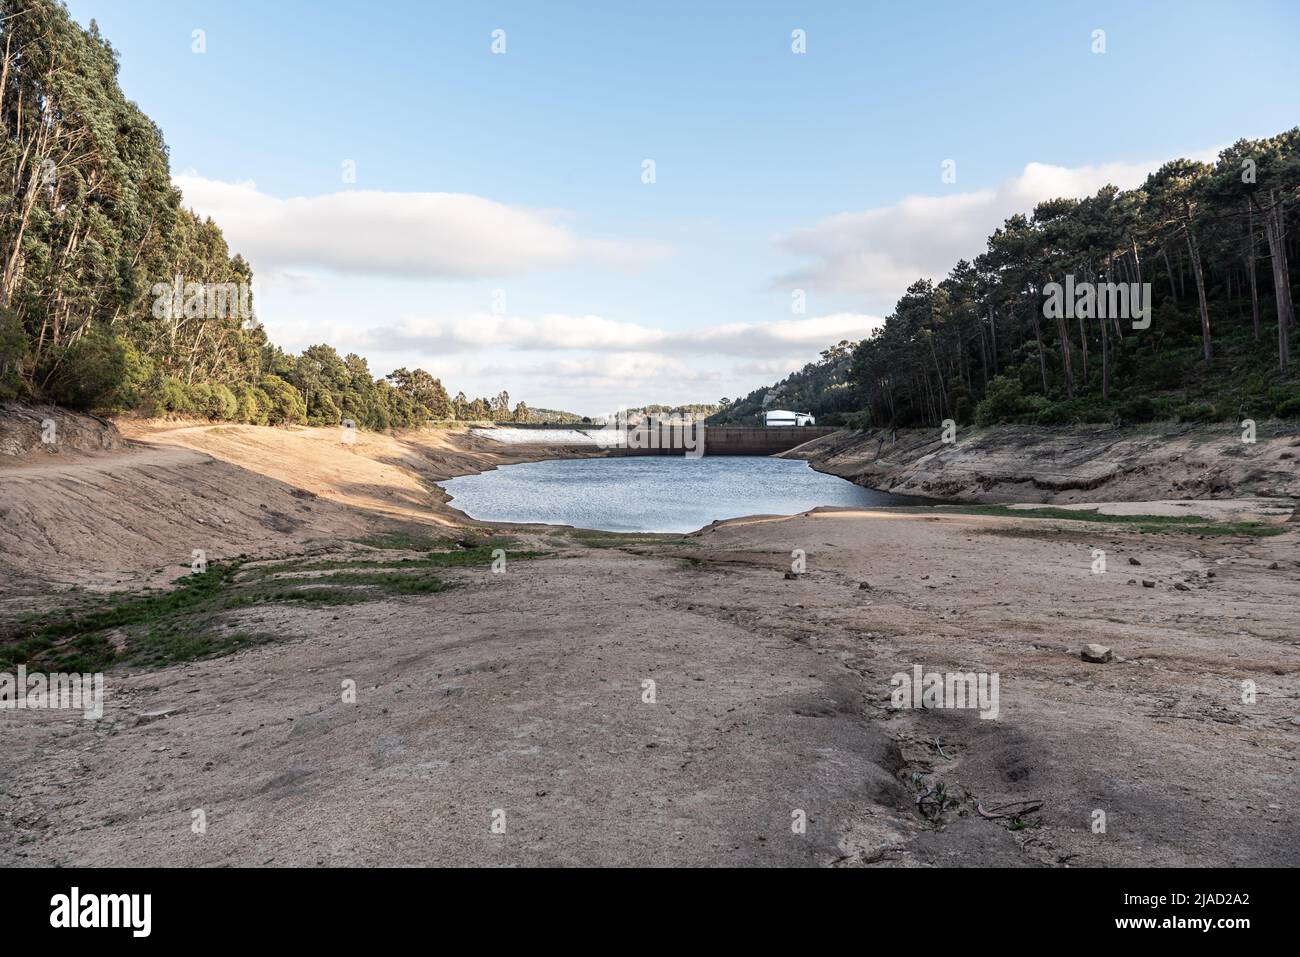 Serra de Sintra, Portugal - 22 May, 2022: River Mula reservoir and dam - Barragem do Rio Mula - during spring drought leaving water levels low Stock Photo